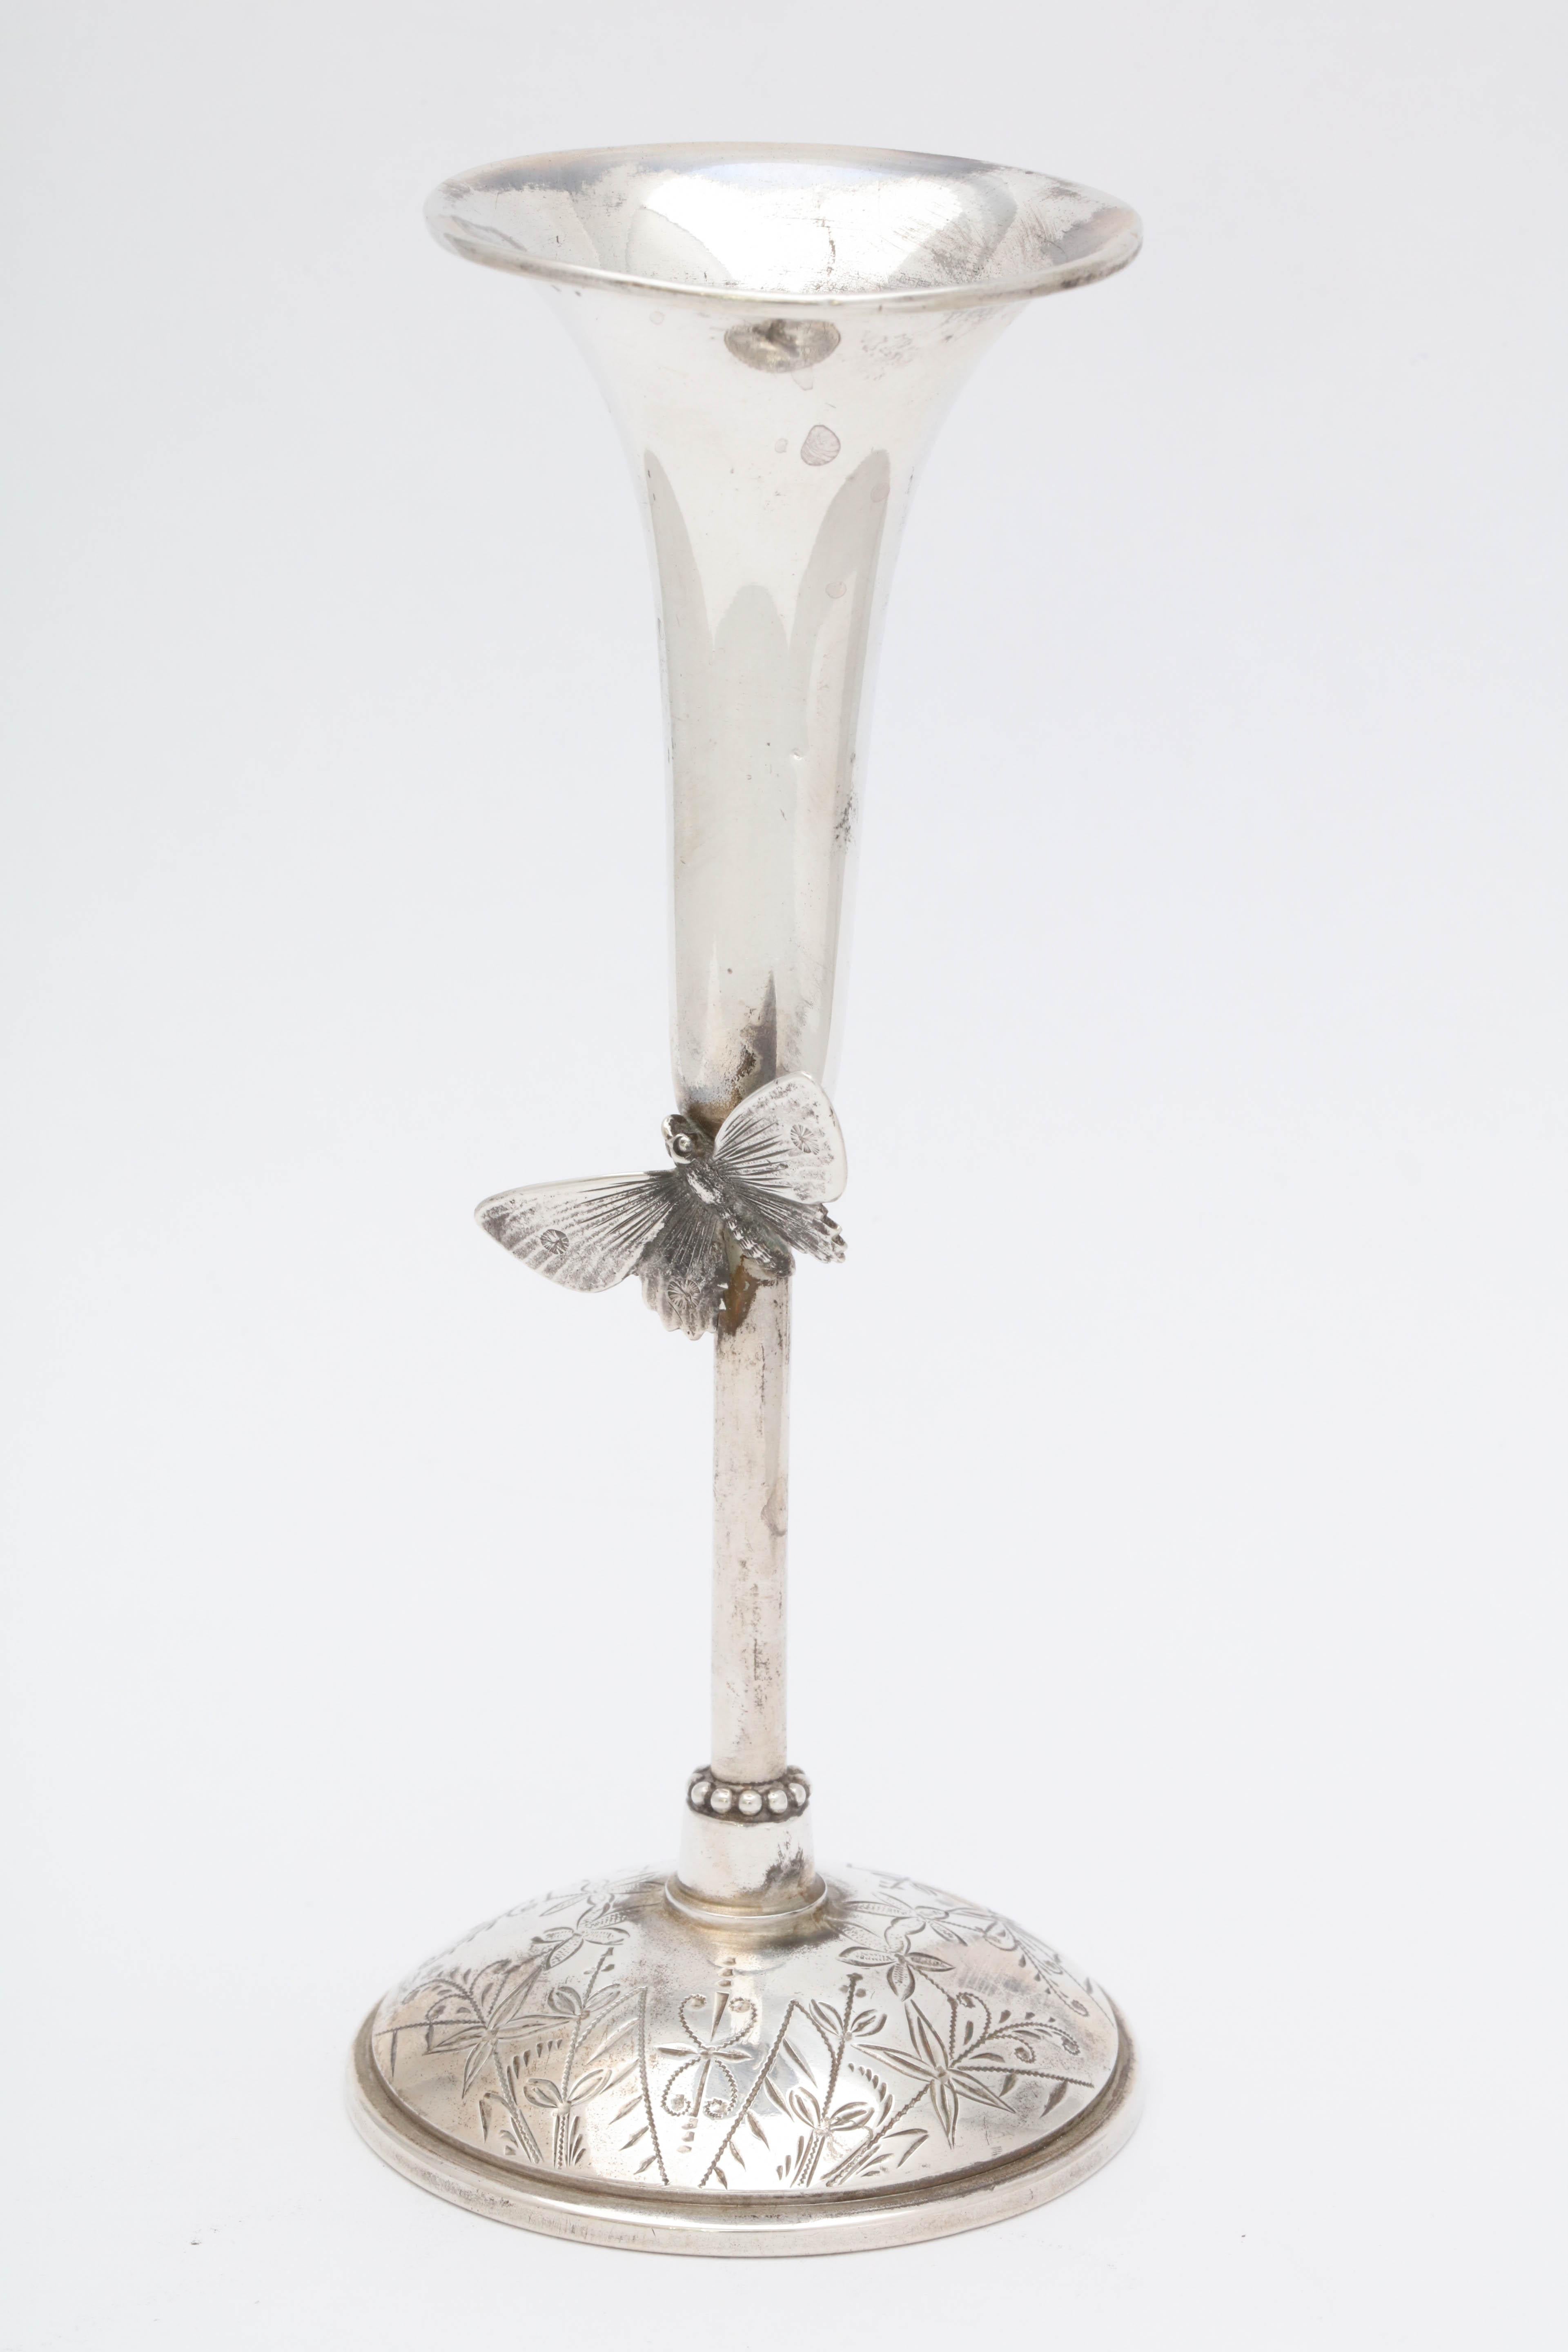 Aesthetic Movement, sterling silver bud vase, Wood and Hughes Co., New York, circa 1875. An applied butterfly decorates the stem. Etched work on base. Measures 5 1/2 inches high x 2 1/4 inches in diameter across base x 2 inches in diameter across